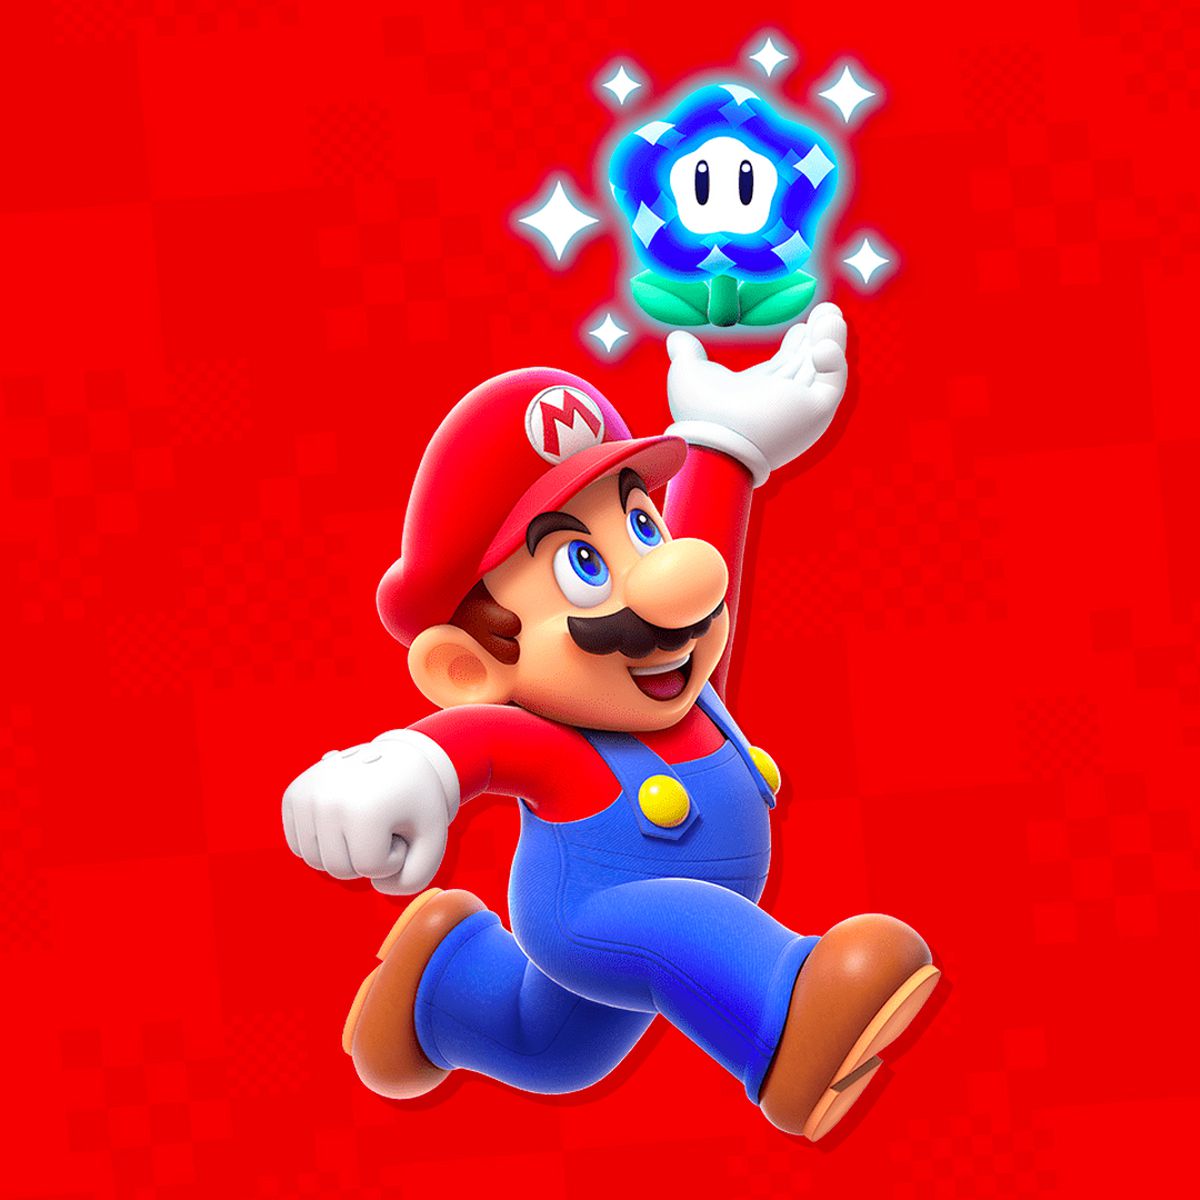 Mario, jumping and reaching for a Wonder Flower, in artwork from Super Mario Bros. Wonder